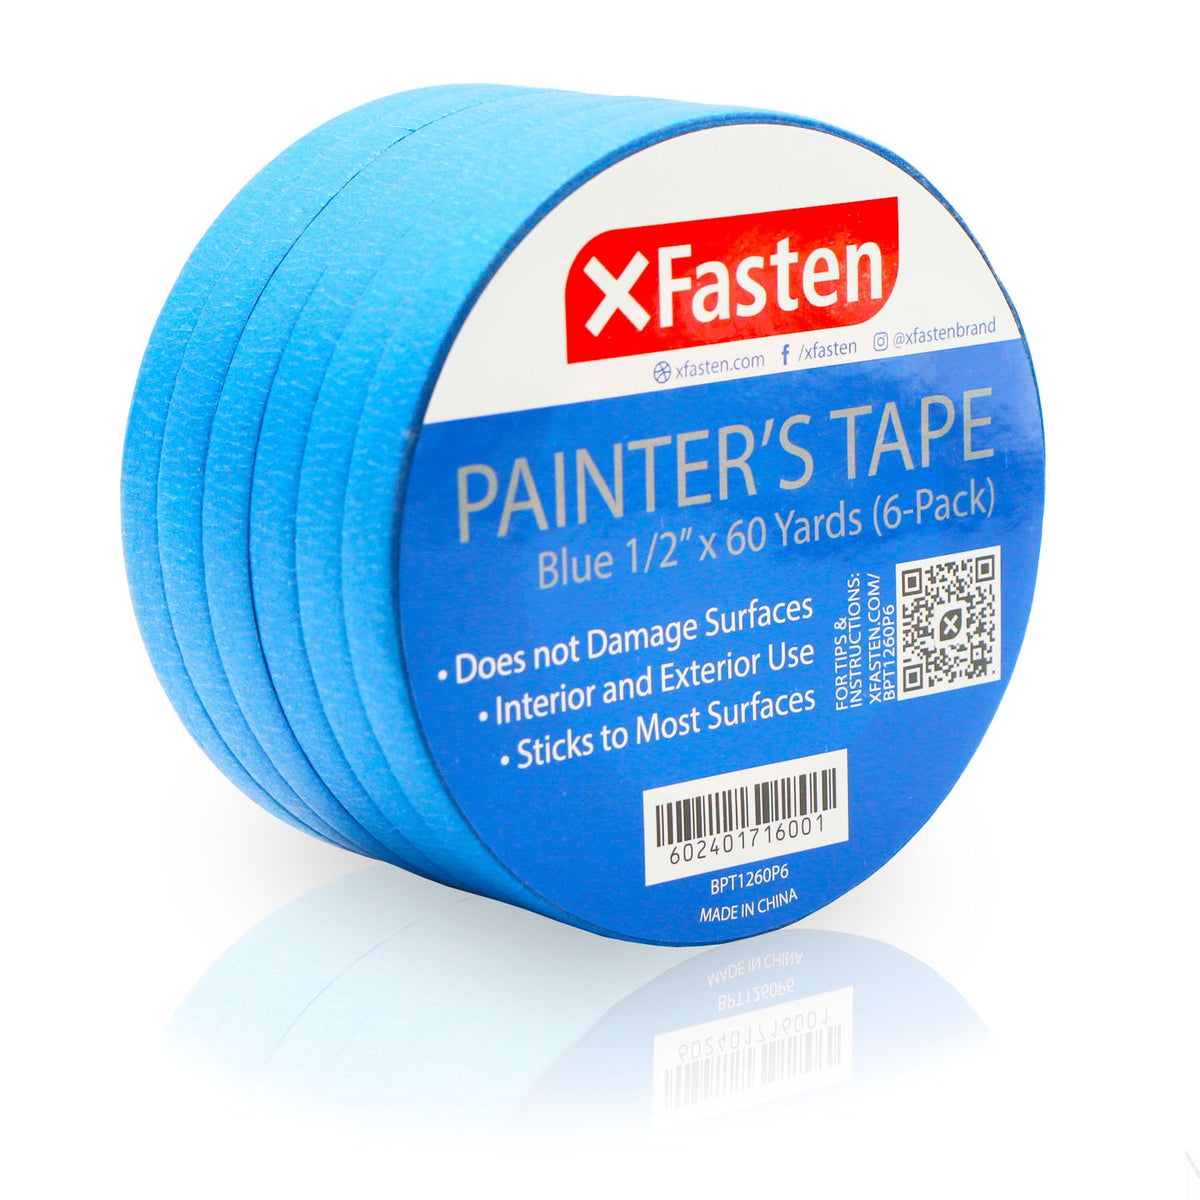 XFasten Professional Blue Painter's Tape | 2 Inch x 60 Yards | 24-Pack